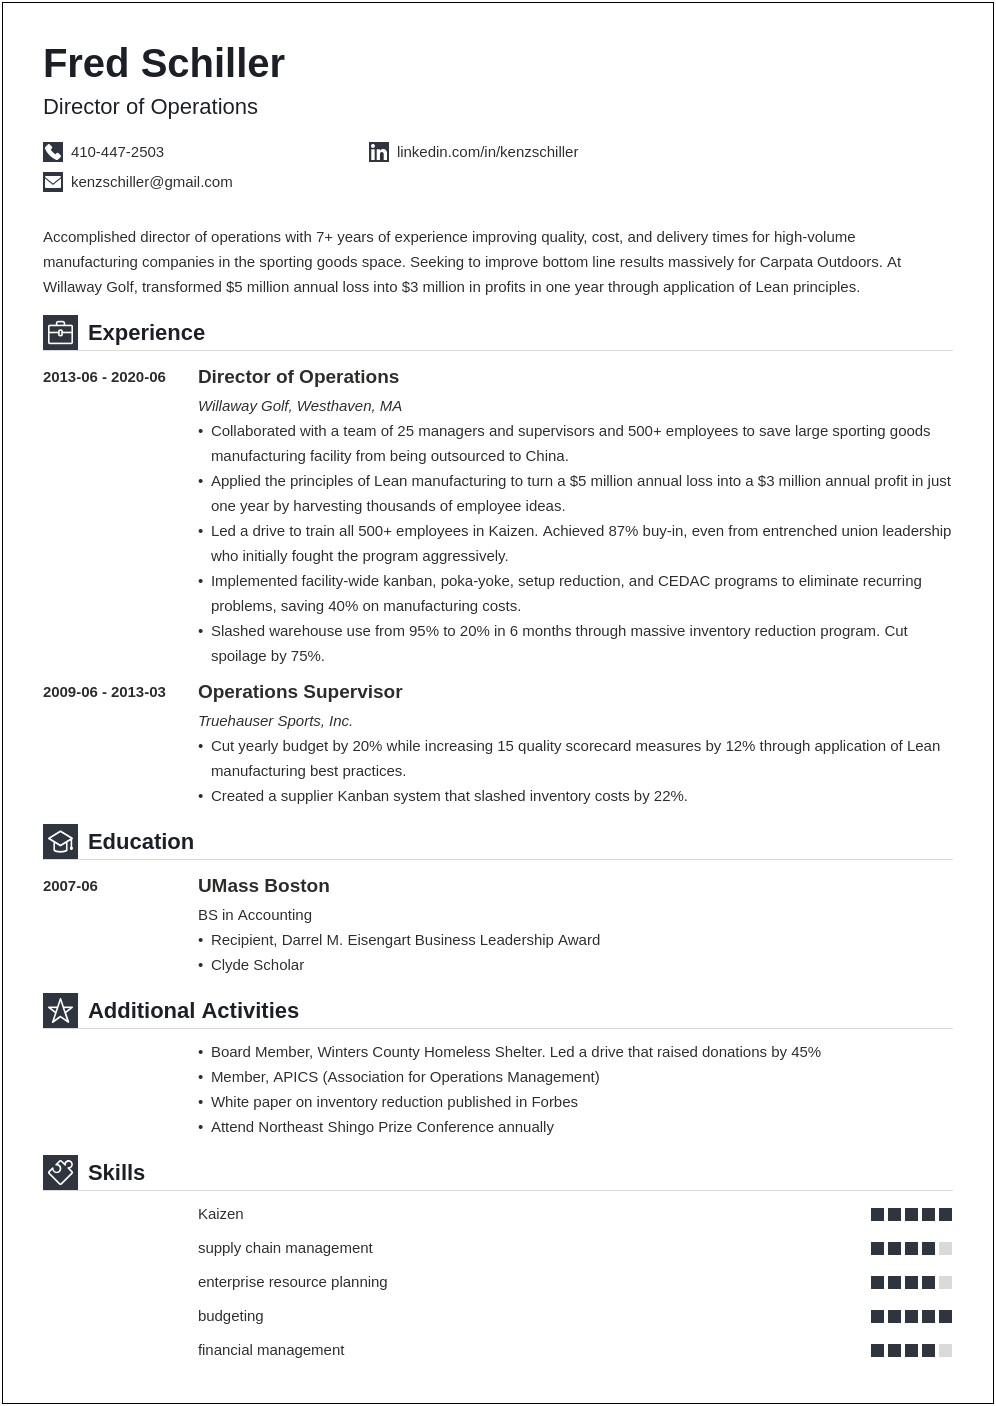 Resume Summary For Vp Of Operations